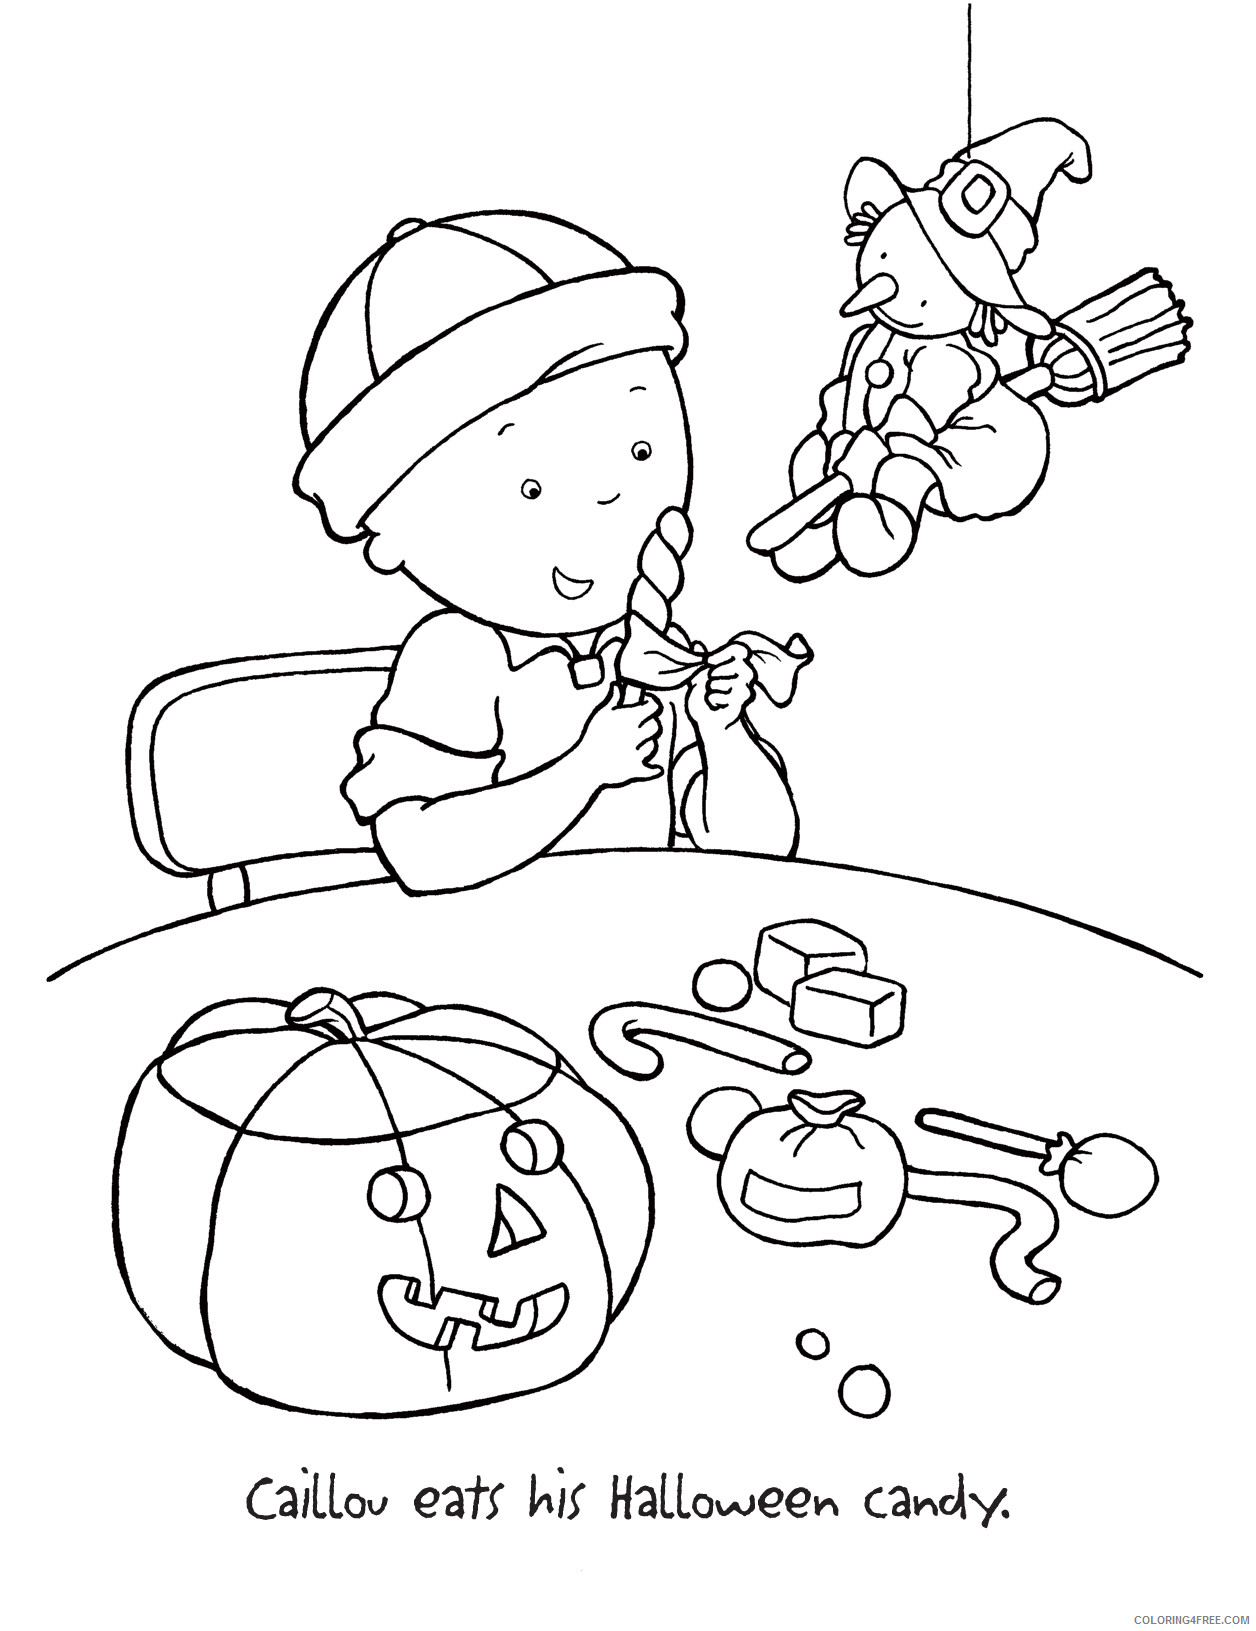 Caillou Coloring Pages Cartoons Caillou Halloween Printable 2020 1502 Coloring4free